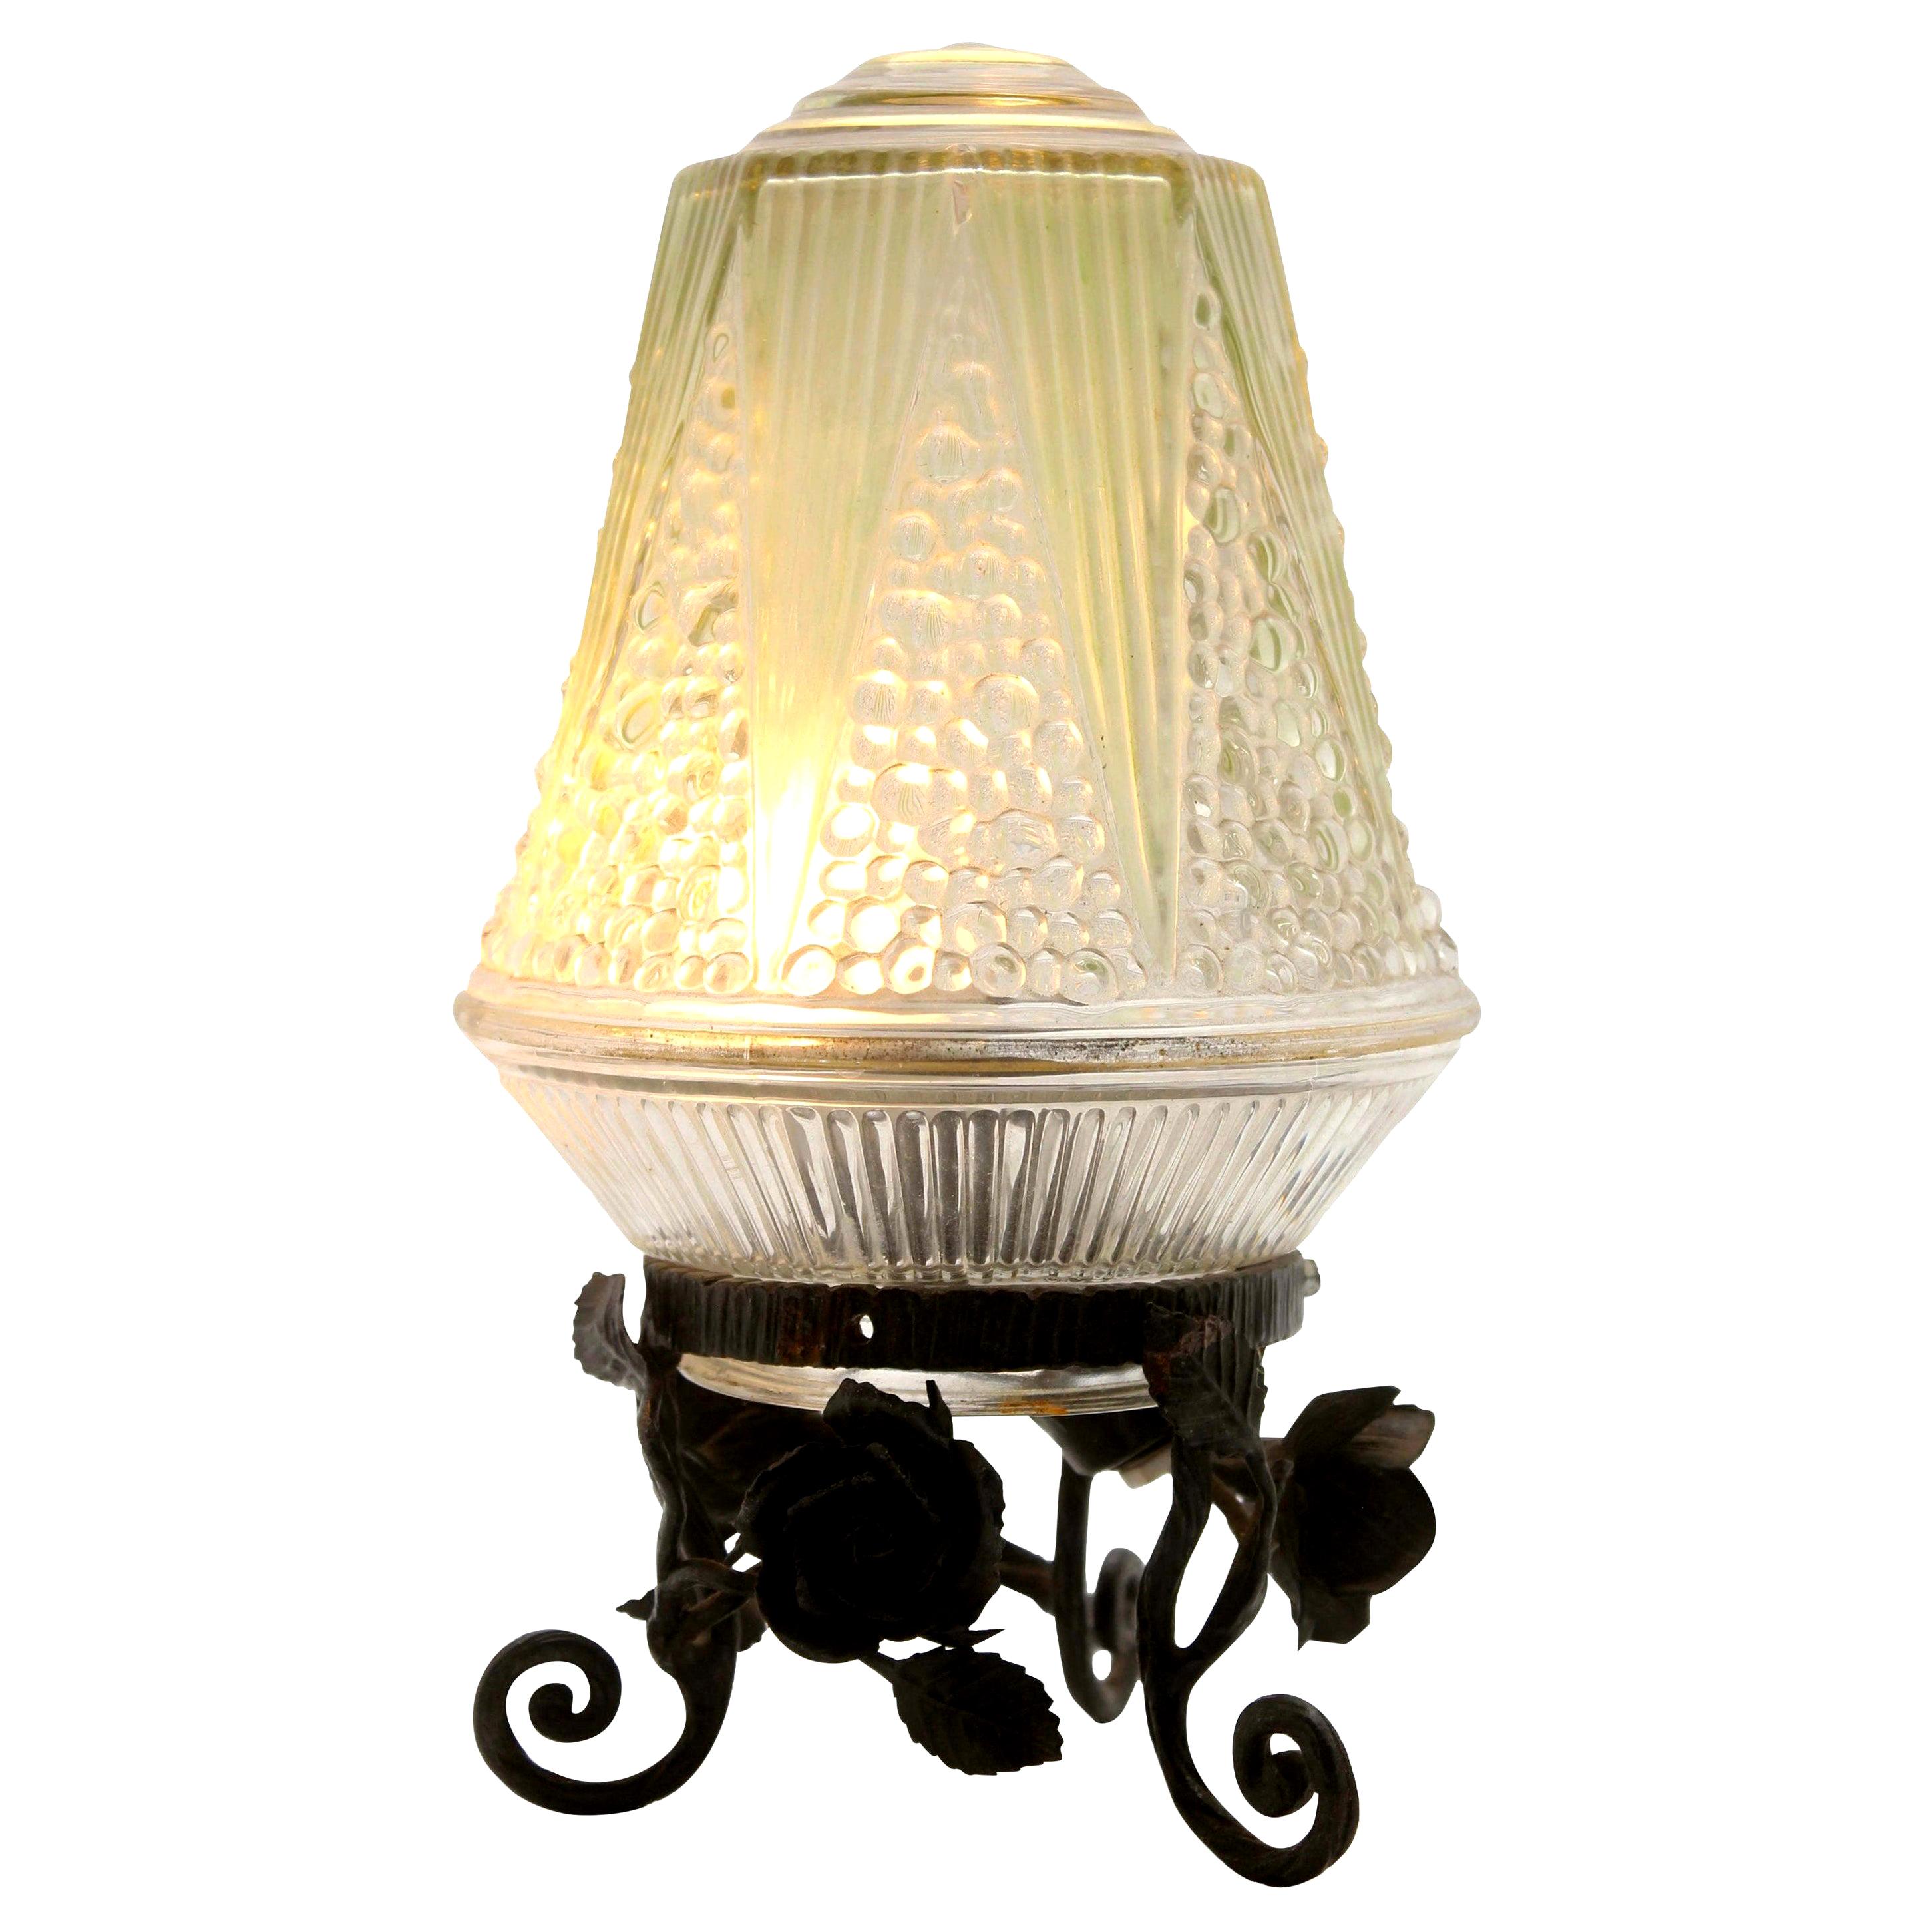 French Art Deco Lamp in Wrought Iron with Floral Pattern and Colored Glass Shade